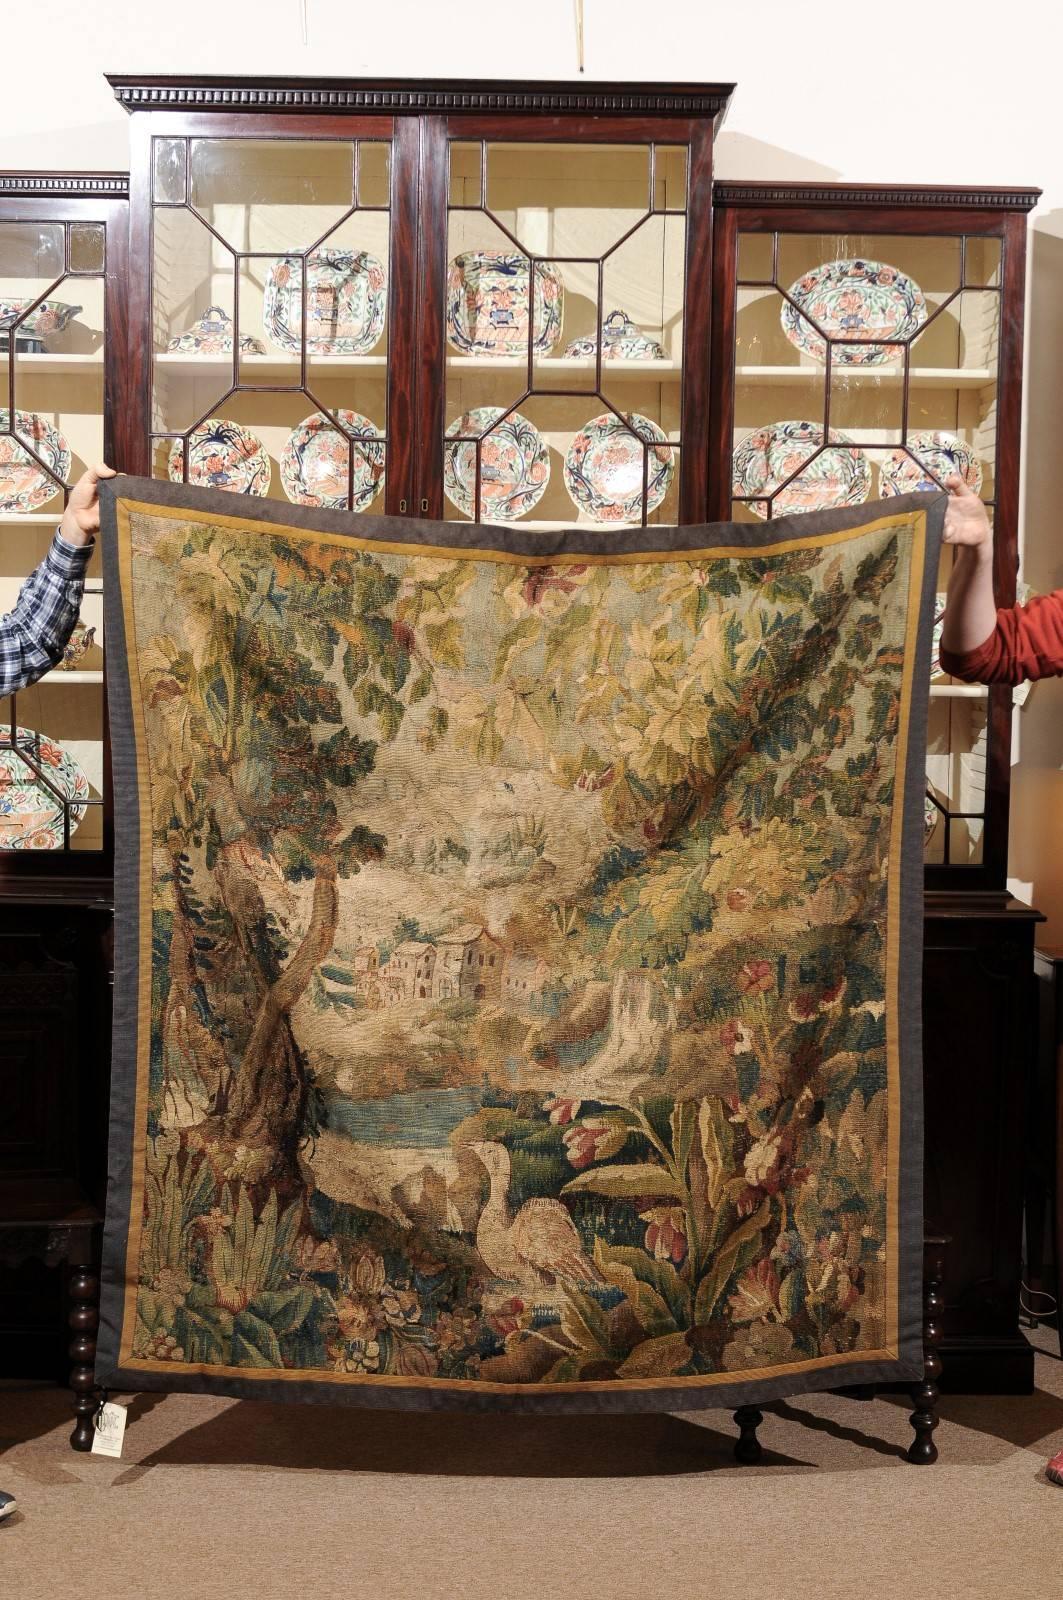 Hand-Woven 18th Century French Aubusson Tapestry of Village through the Trees